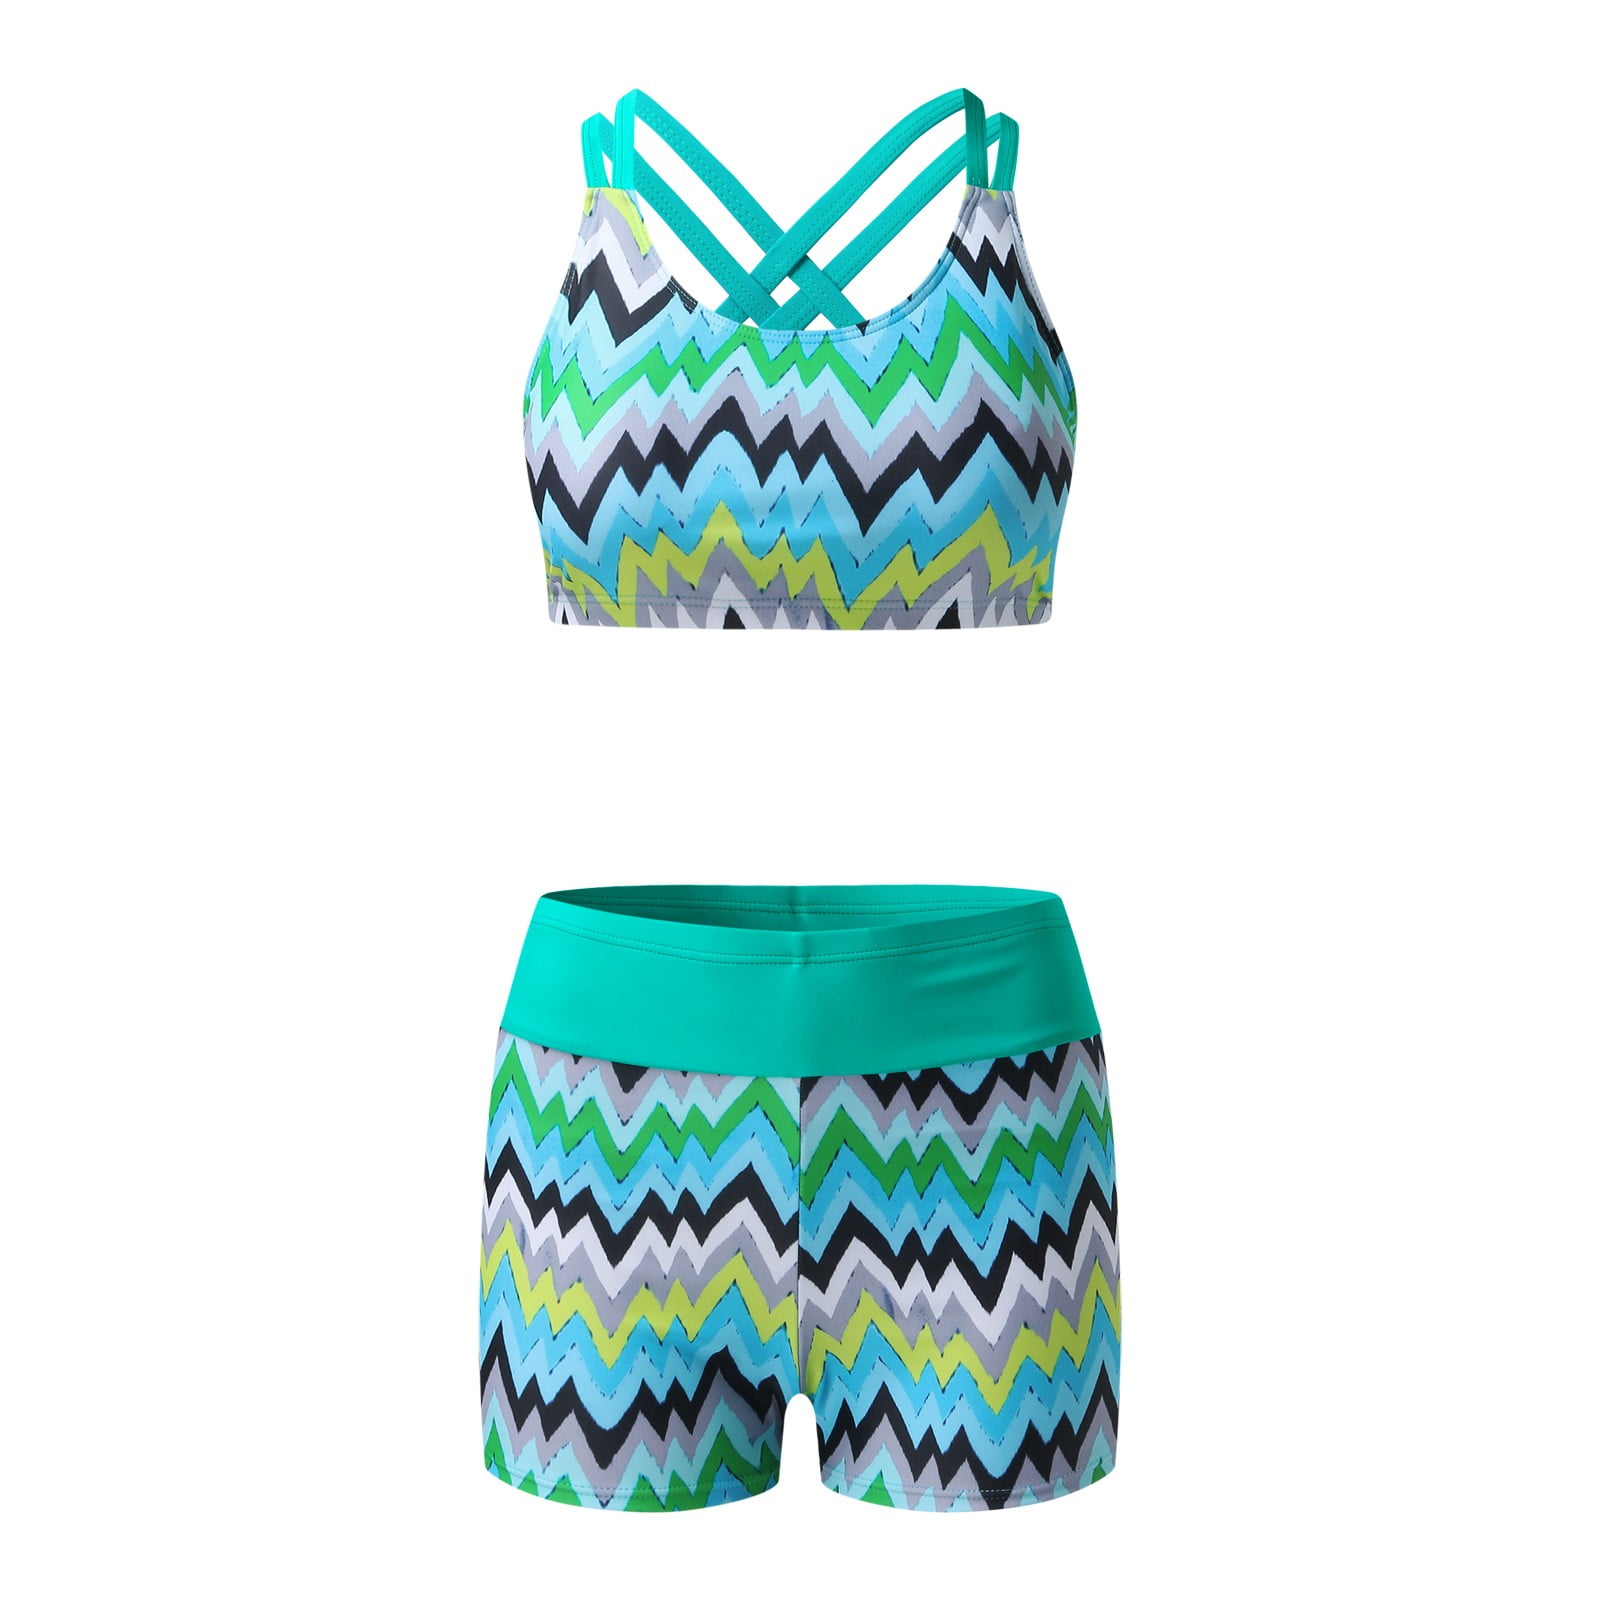 Cathalem Bathing Suit Tops for Women Support Women Swimsuits Printed 3  Piece Bathing Suits Swim Tank Top With Mesh Swimsuit Top Underwear Mint  Green X-Large 